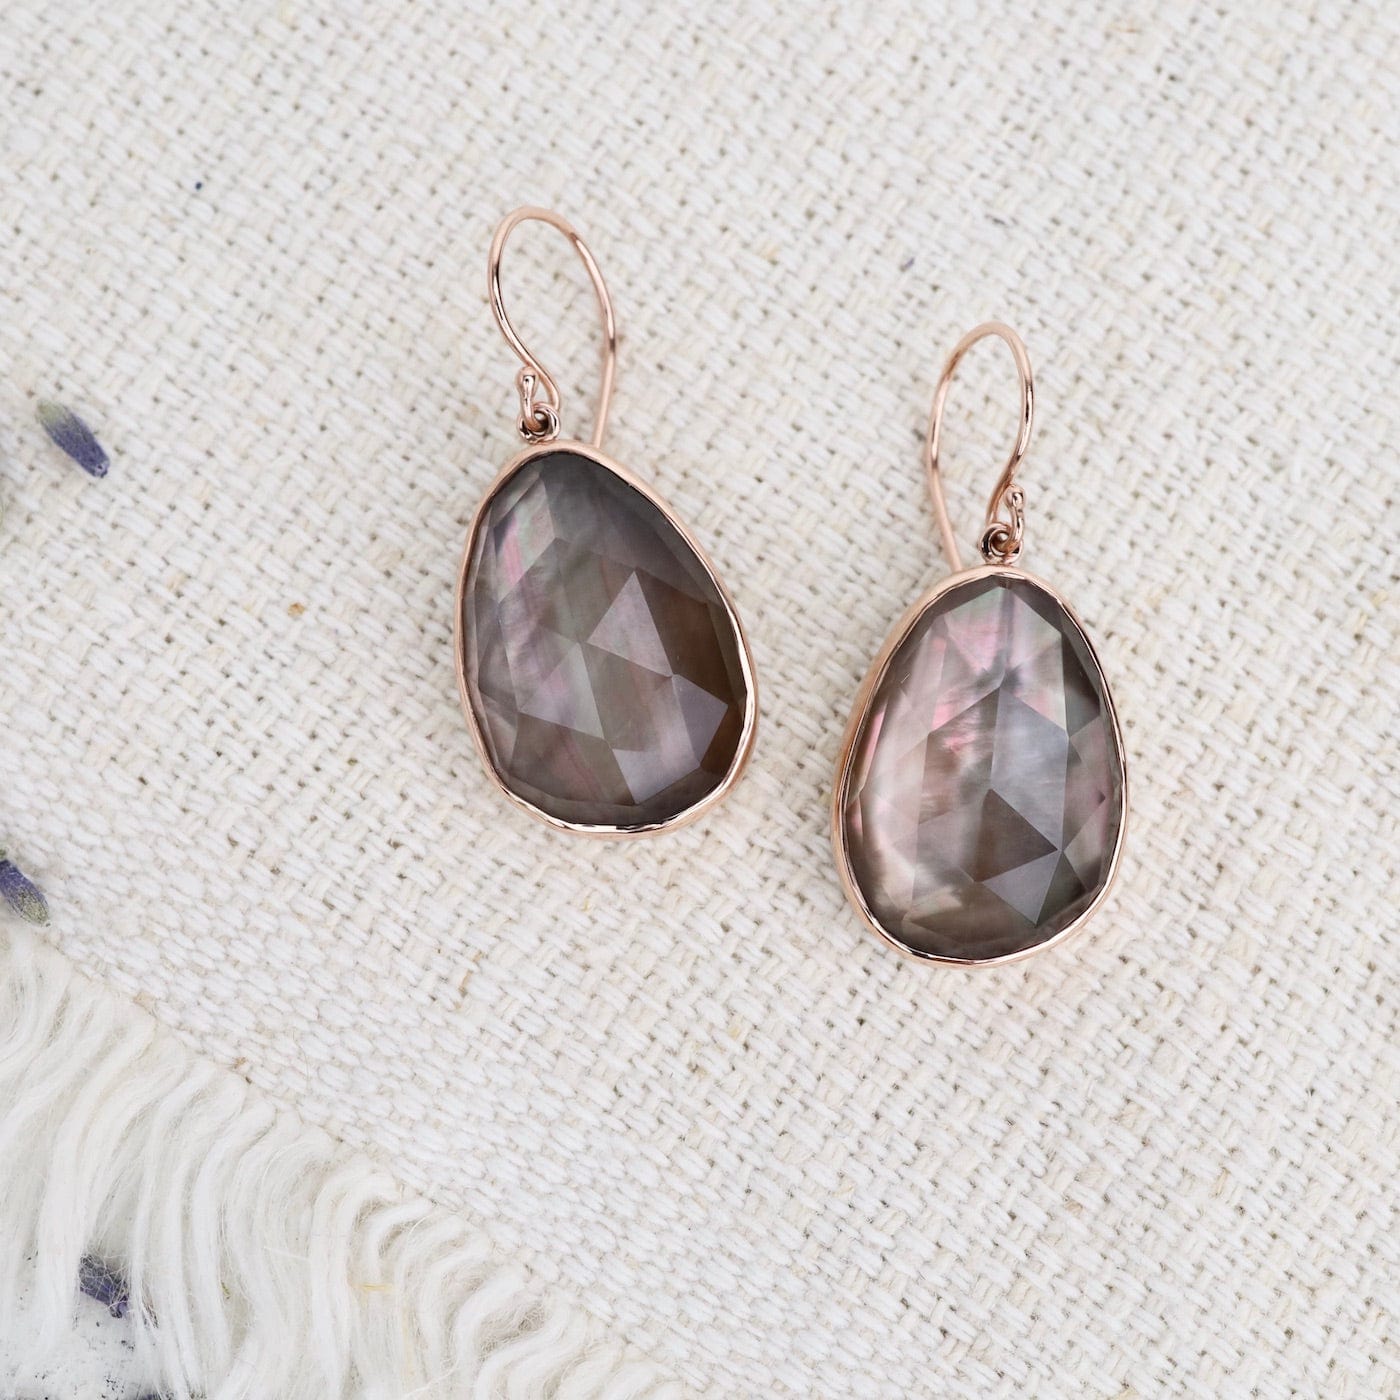 EAR-14K Sterling & 14K Rose Gold Earrings with Rose Cut Rock Crystal Over Black Mother of Pearl